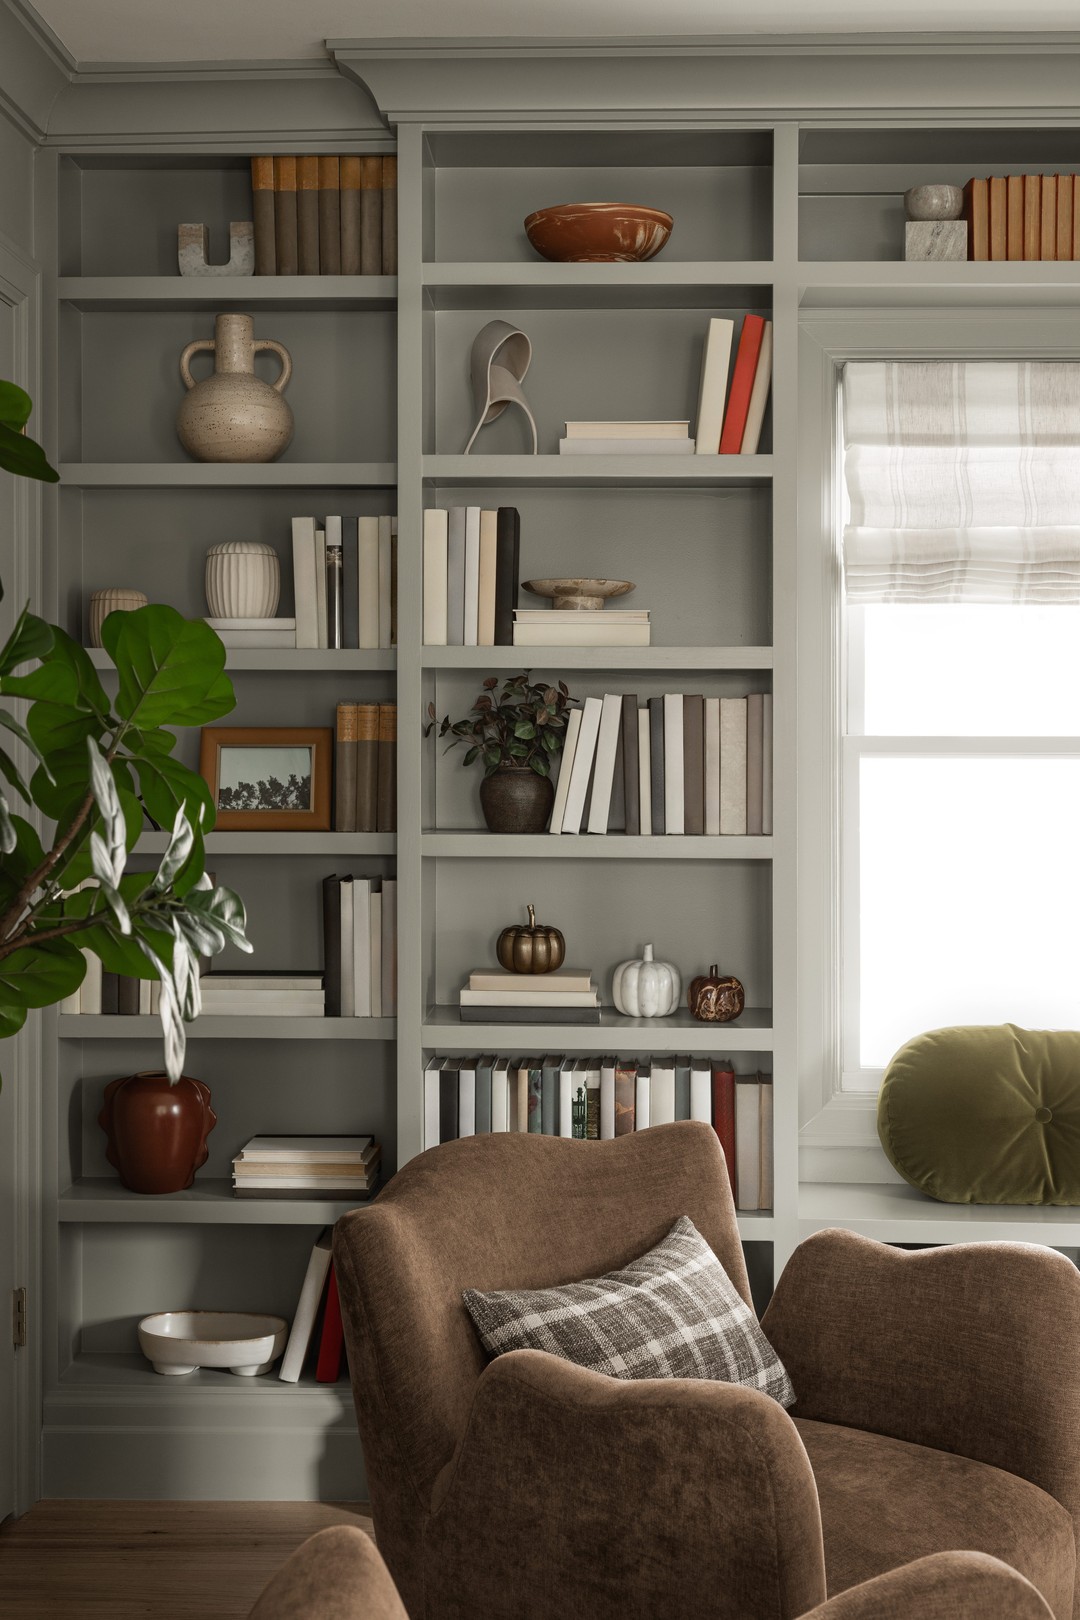 Sometimes, styling built-ins can feel overwhelming. Start with these tips from Shea if you're facing a few empty shelves that you need to fill! #thresholdxstudiomcgee